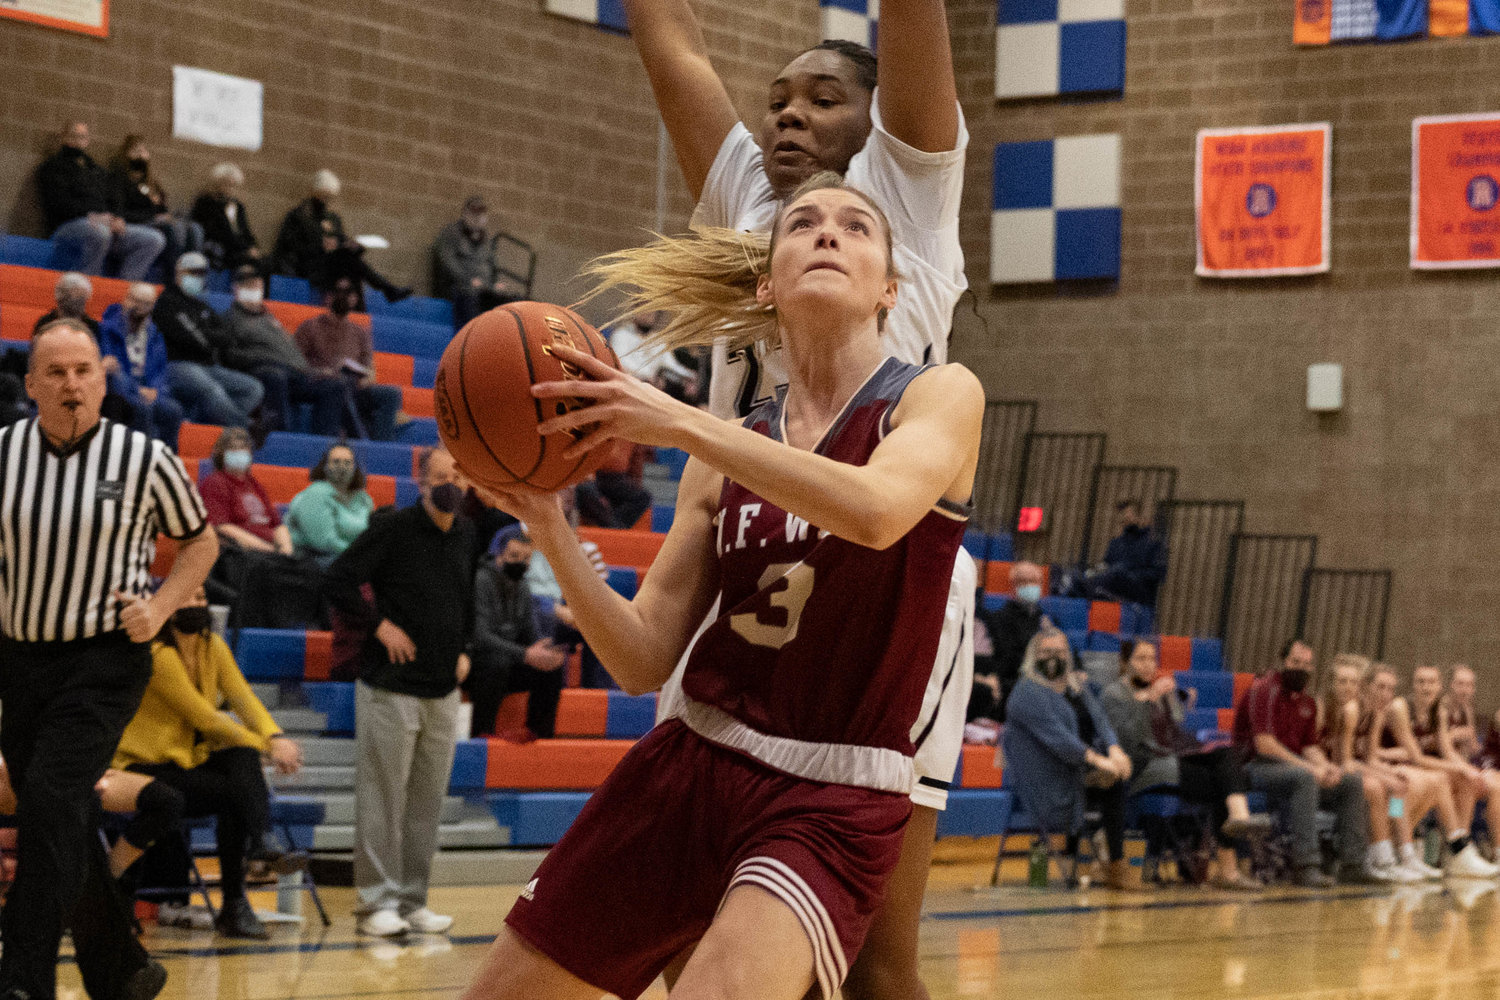 W.F. West forward Lexi Roberts rises for a layup against Hudson's Bay in the 2A District IV semifinals at Ridgefield Feb. 14.